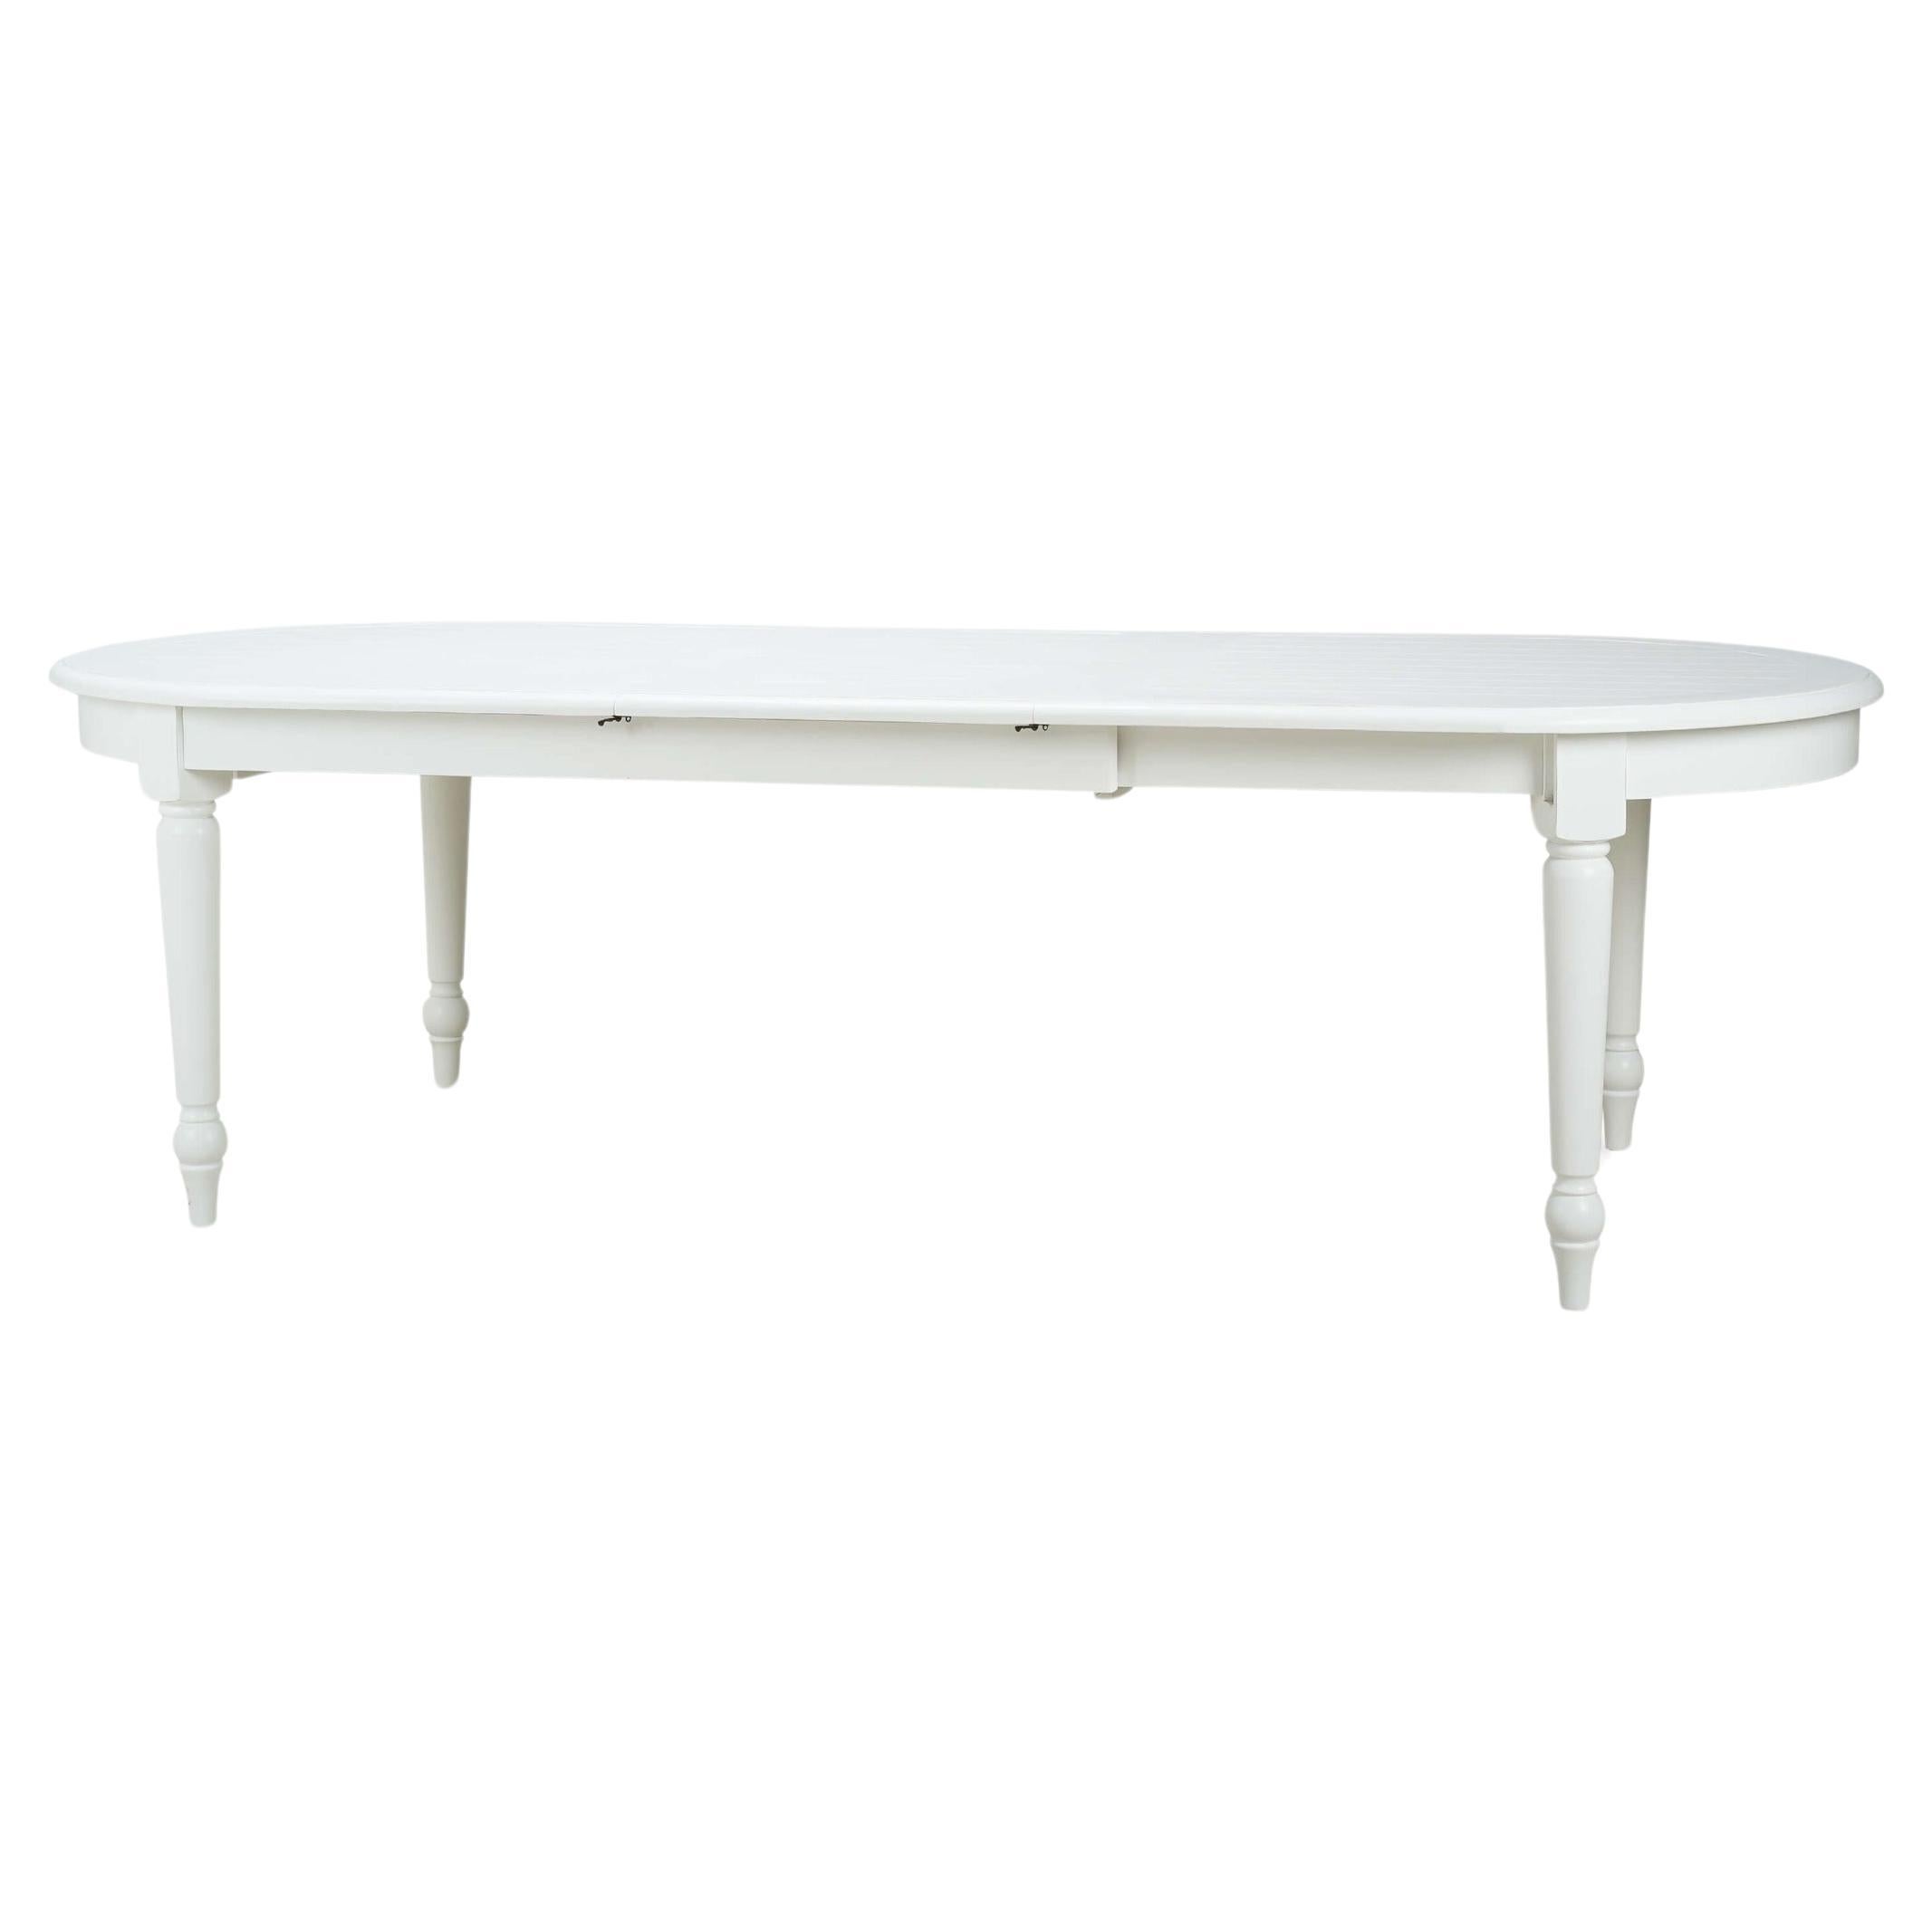 French Provincial Extendable Oval Dining Table